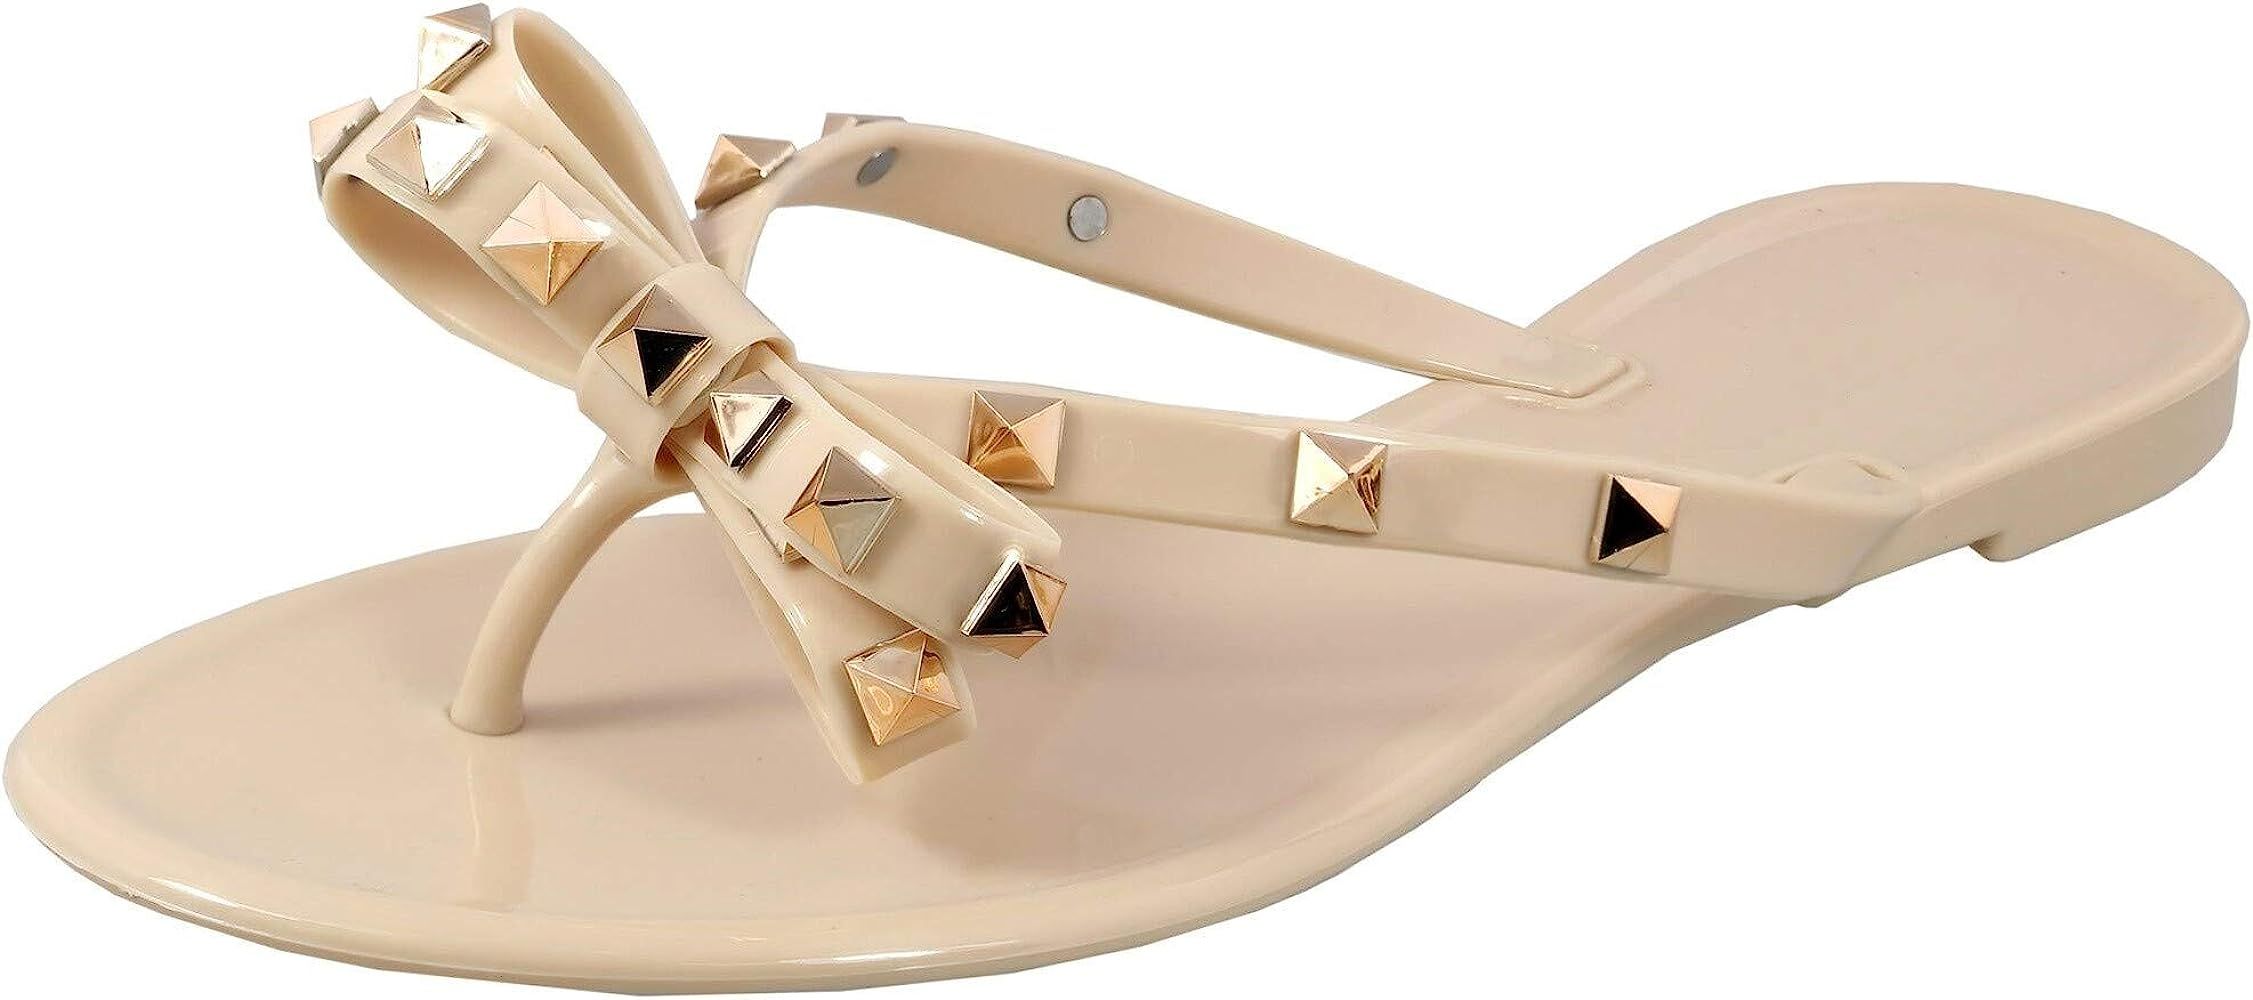 Womens Studded Flip Flops with Bow Open Toe Jelly Sandals | Amazon (US)